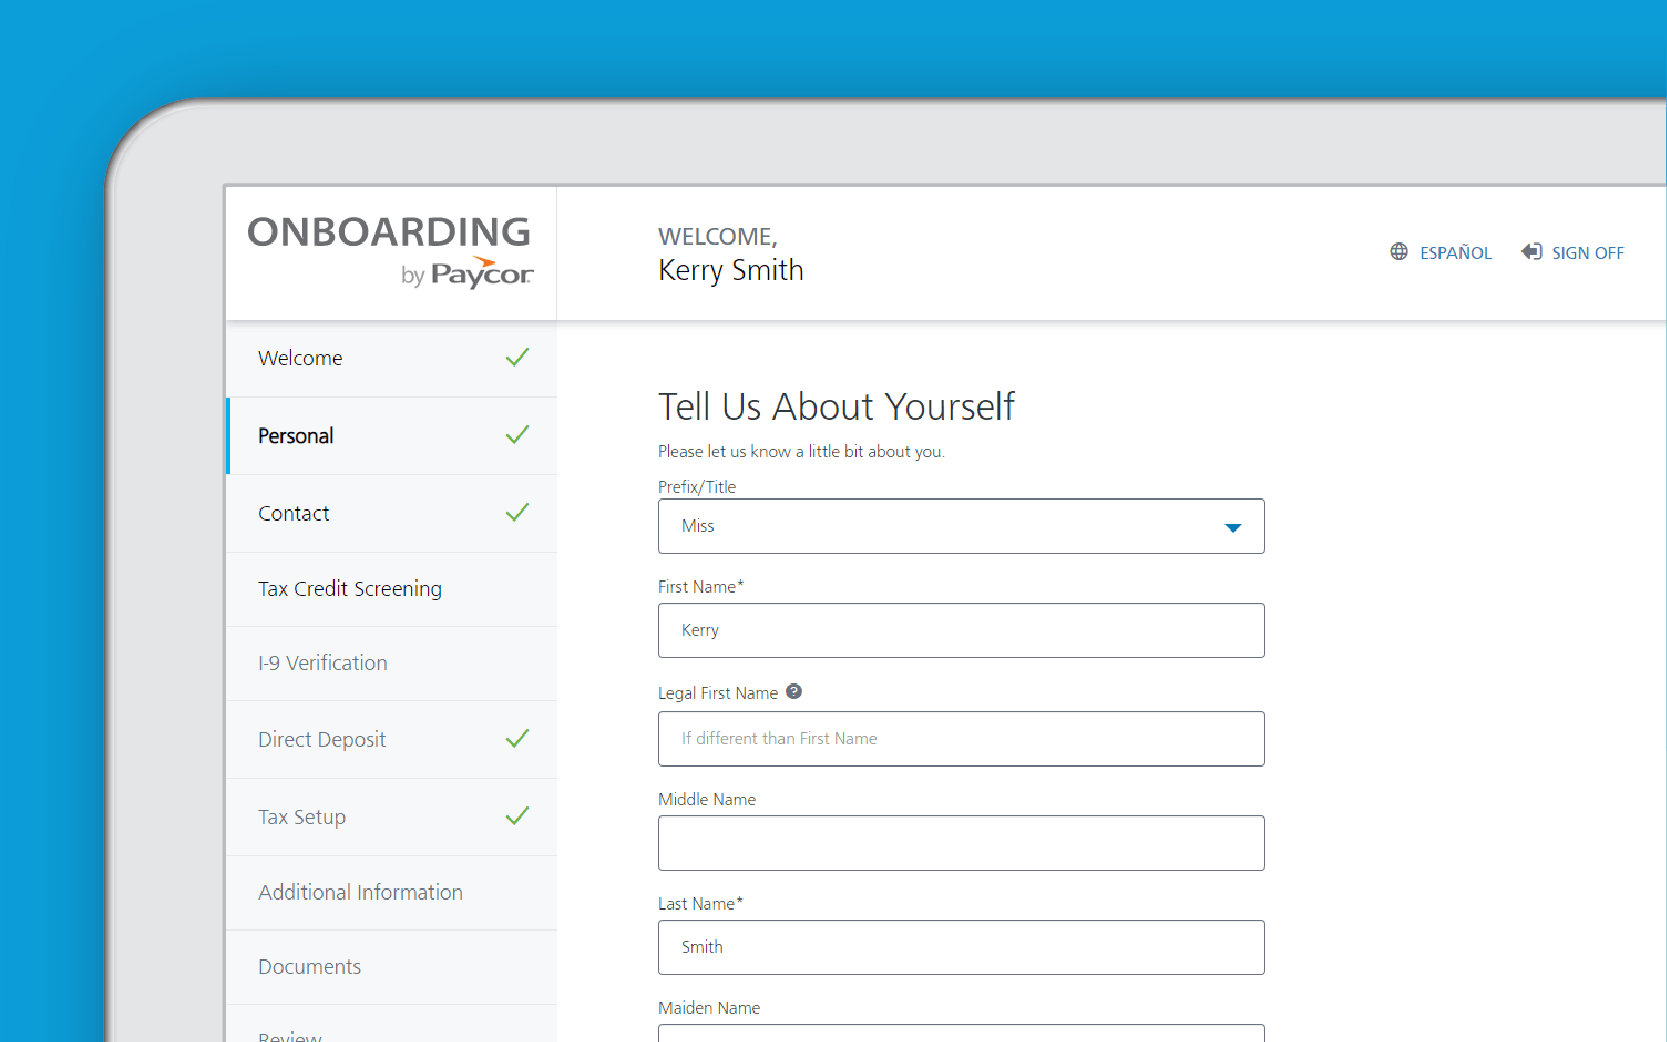 Corner of tablet showing Paycor onboarding dashboard against blue background